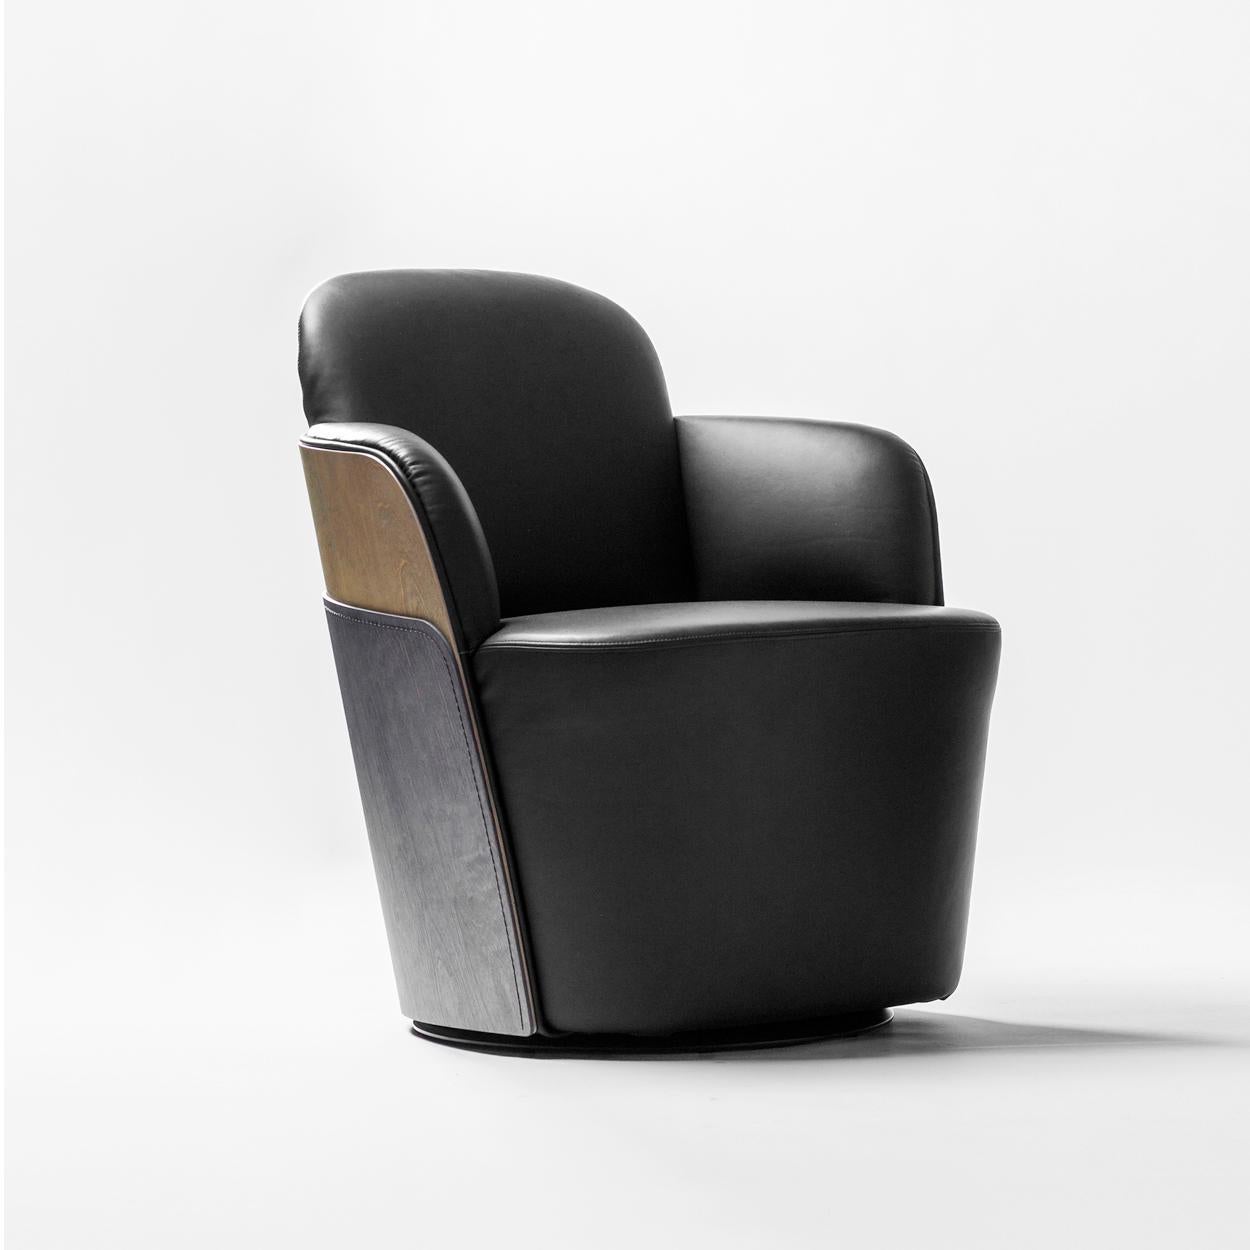 Armchair designed by Färg & Blanche manufactured by BD Barcelona.

Solid wooden seat structure and upholstered. Exterior backrest made up of two birch plywood pieces sewn together and stained in a degraded color. Upholstered in leather. Optional